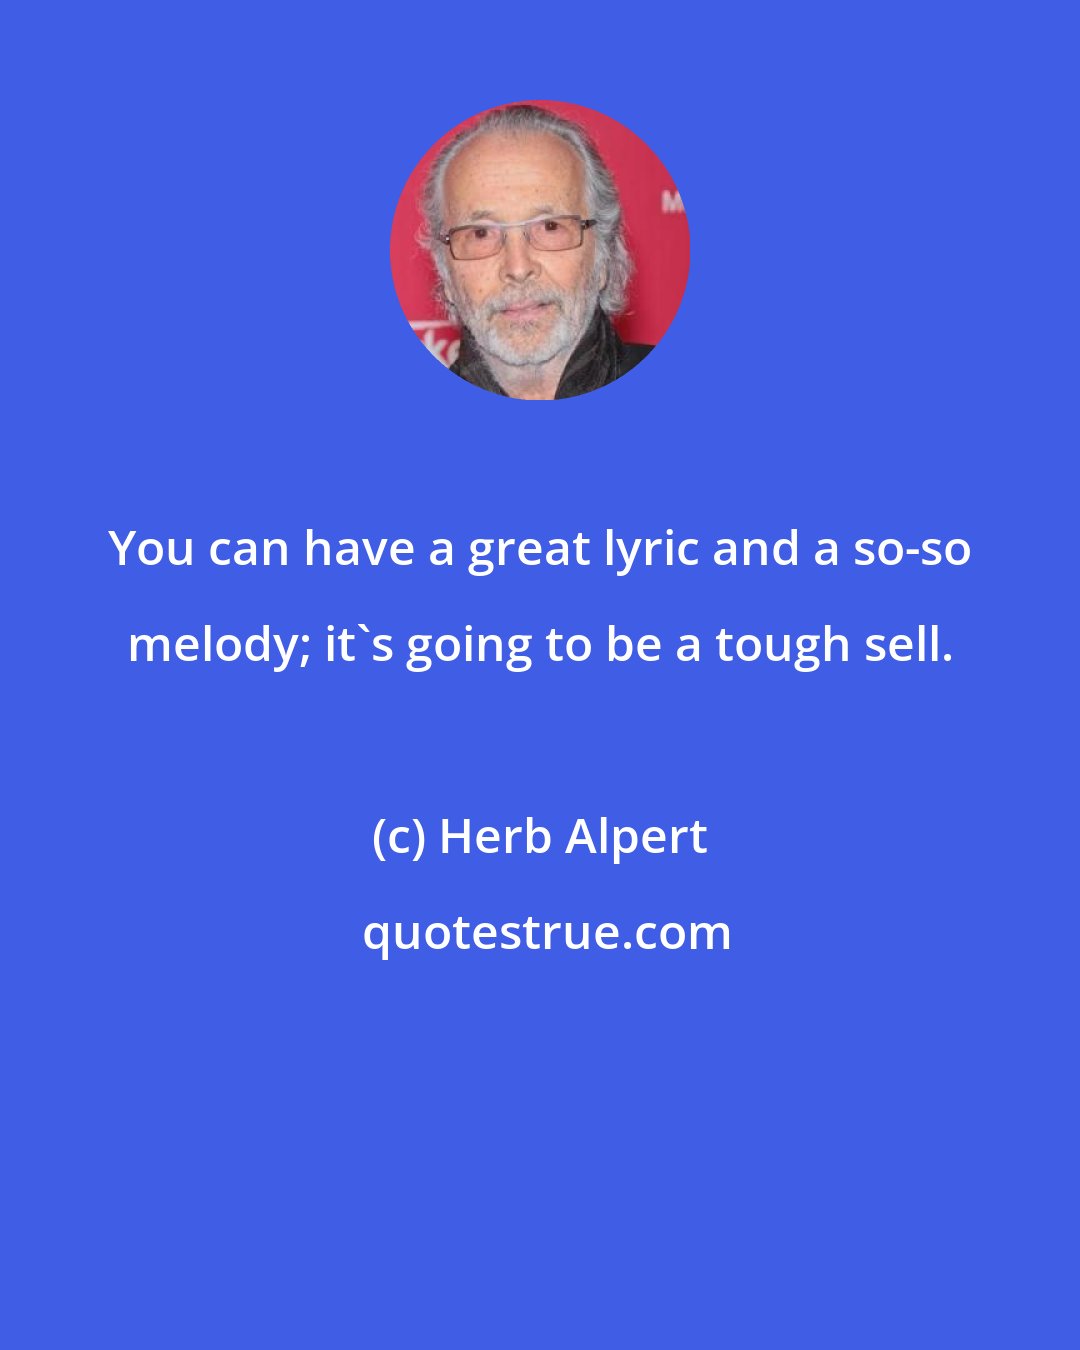 Herb Alpert: You can have a great lyric and a so-so melody; it's going to be a tough sell.